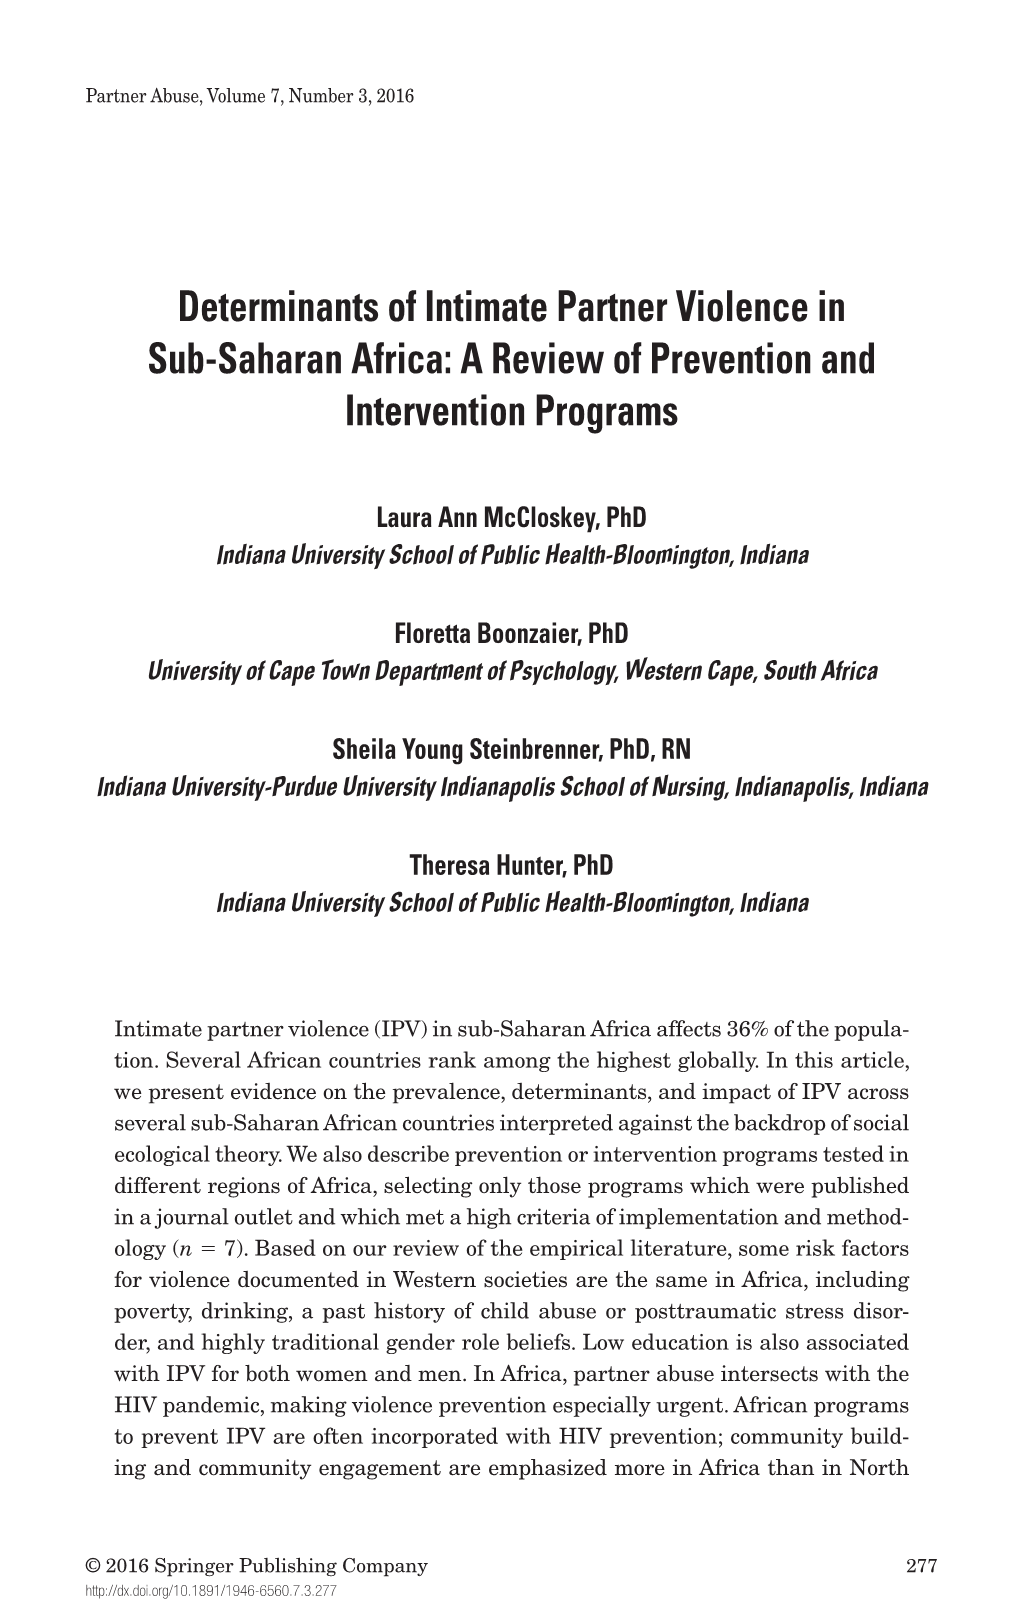 Determinants of Intimate Partner Violence in Sub-Saharan Africa: a Review of Prevention and Intervention Programs